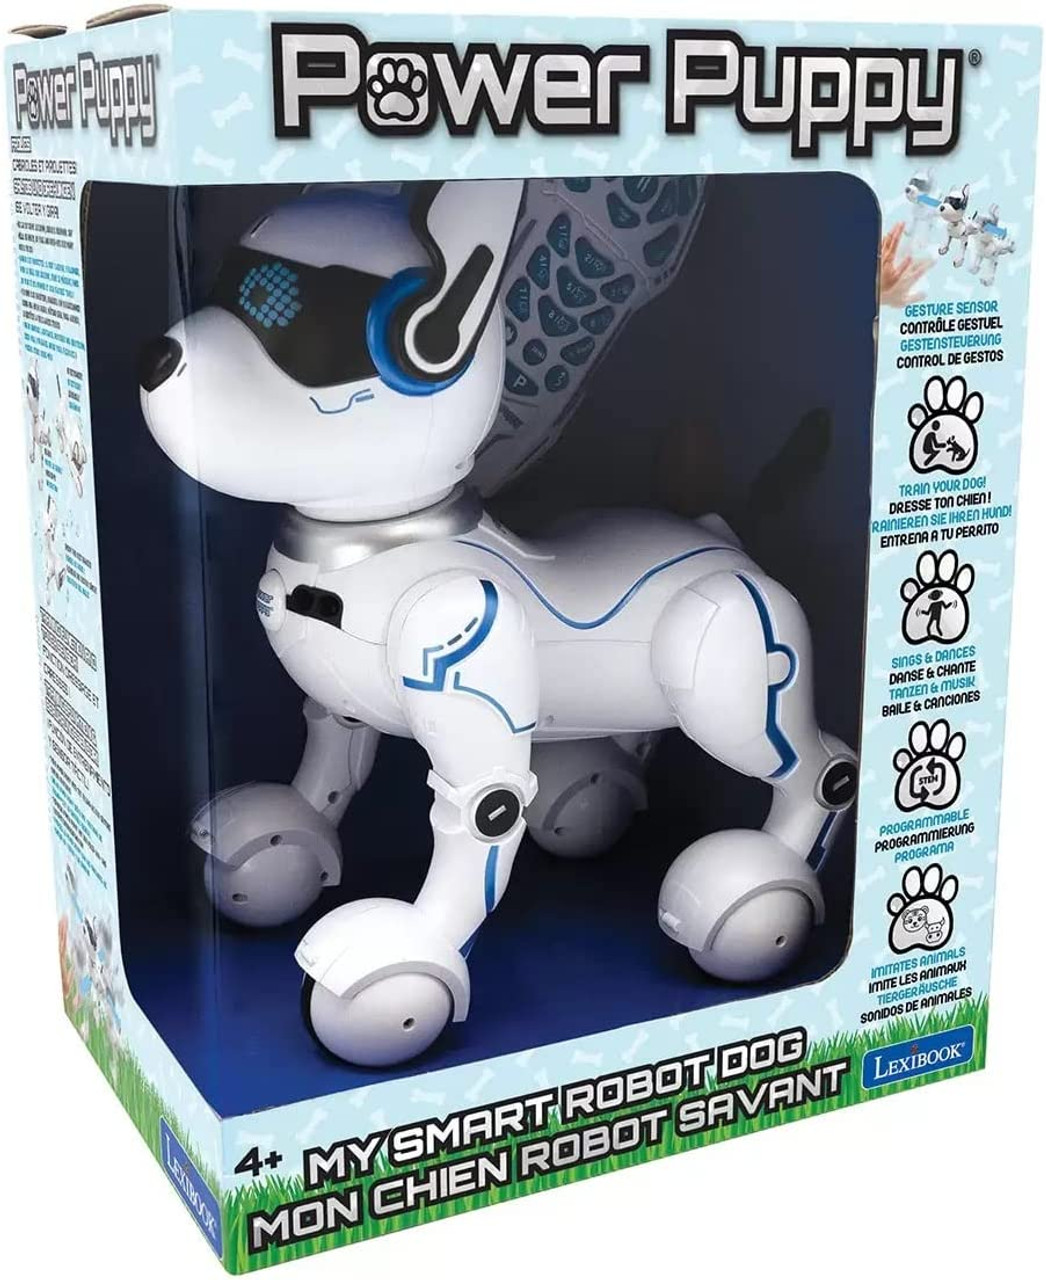 Lexibook Power Puppy - My Smart Dog Robot to train - Programmable robot  with remote control, training and gesture control function, dance, music,  light effects, rechargeable, toy for children - DOG01 